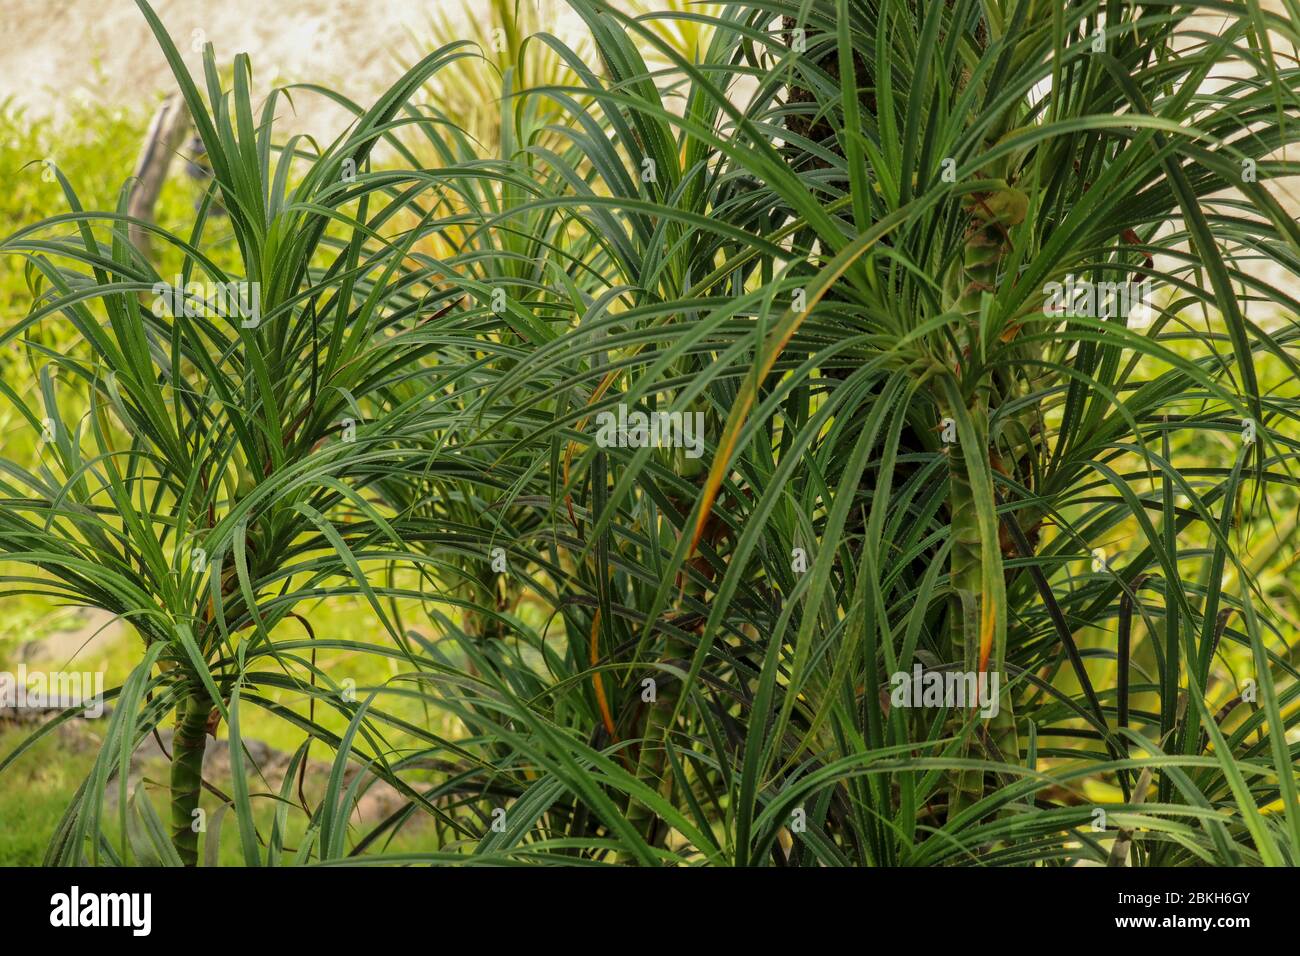 Youg plant Pandanus Tectorius, Pandanus Odoratissimus tree with natural sunlight in the morning. Herbal use for diuretic and relieve a fever on side v Stock Photo